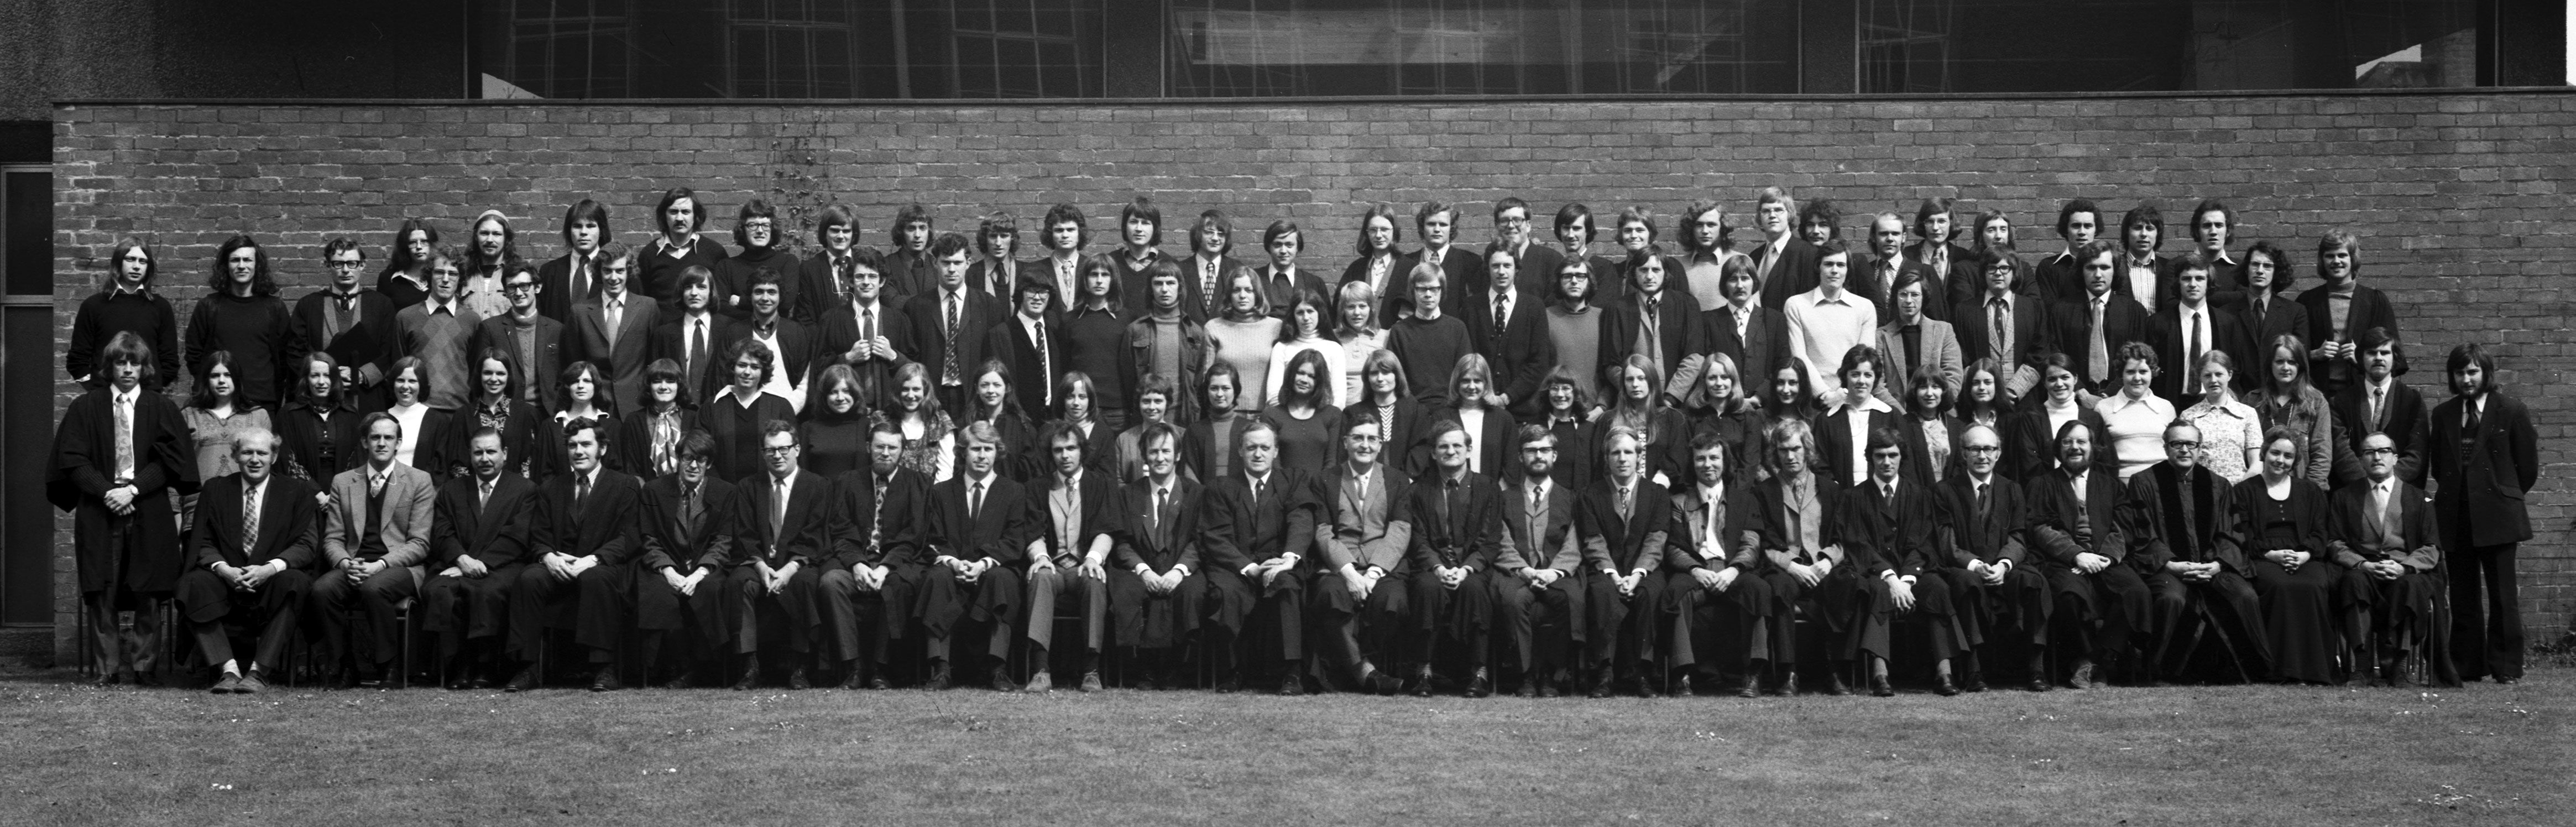 Geography Department Undergraduate Group photo from 1974